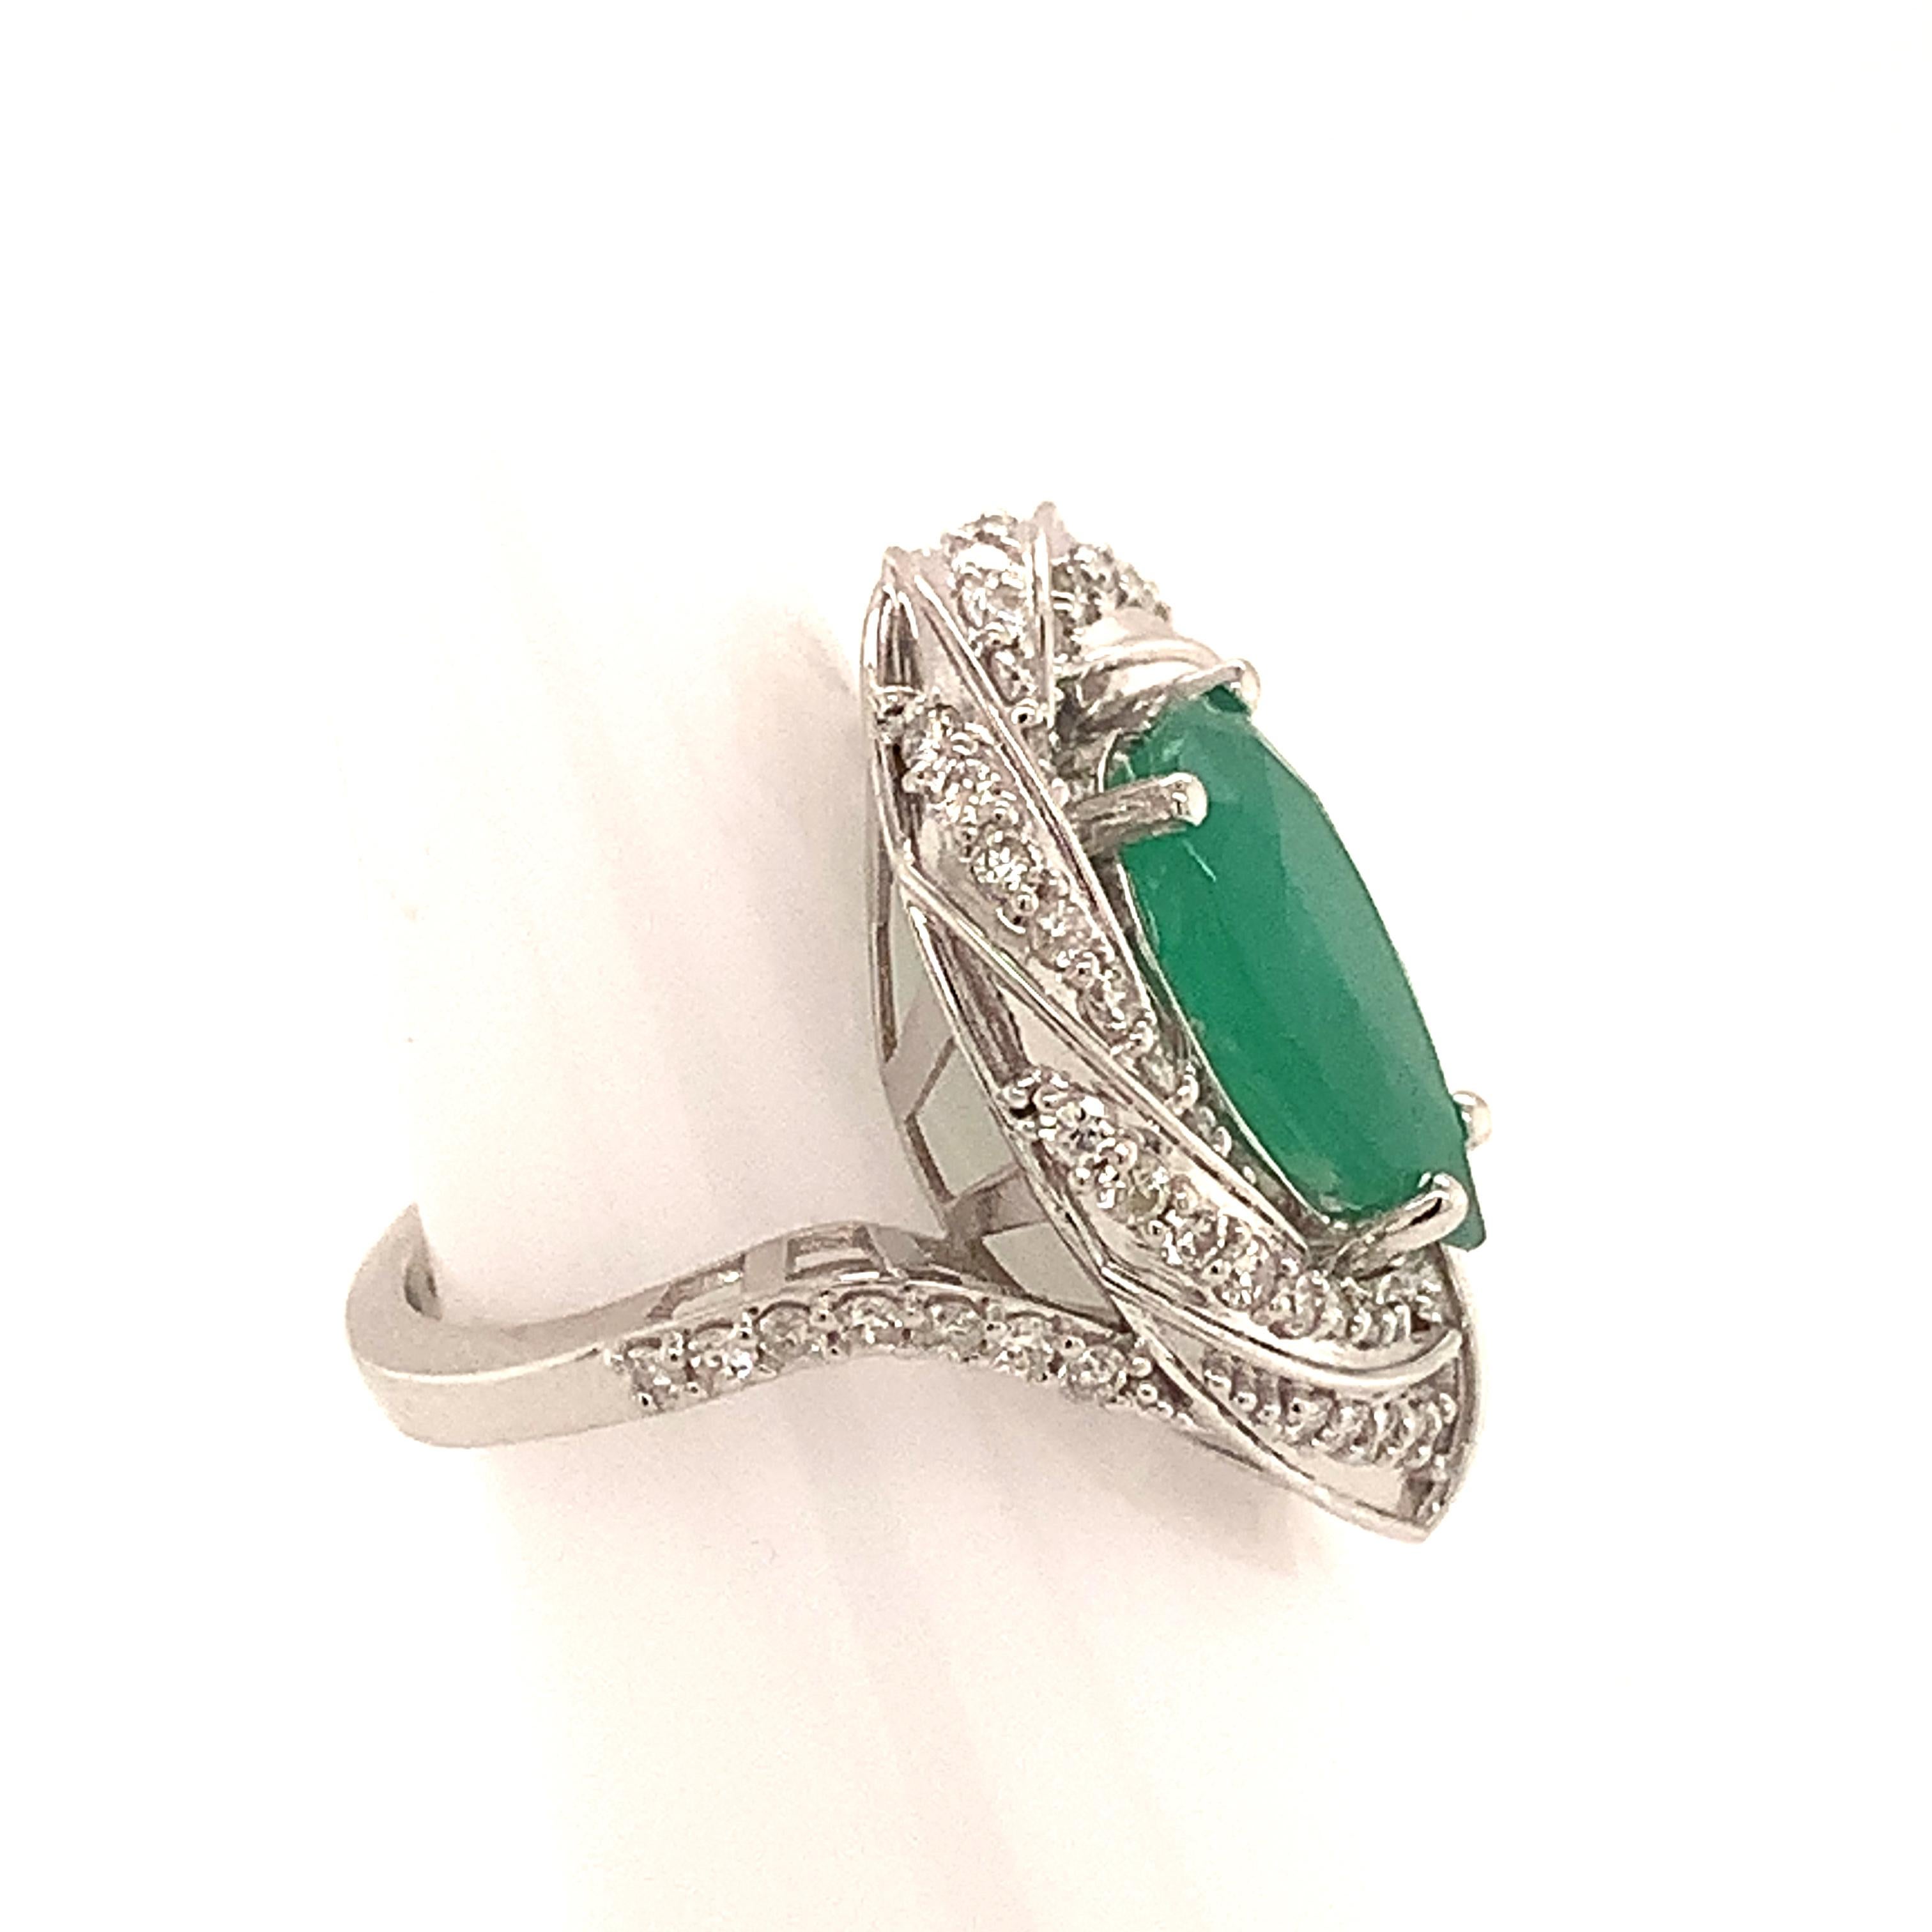 Natural Emerald Diamond Ring 14k Gold 6.1 TCW Certified For Sale 6